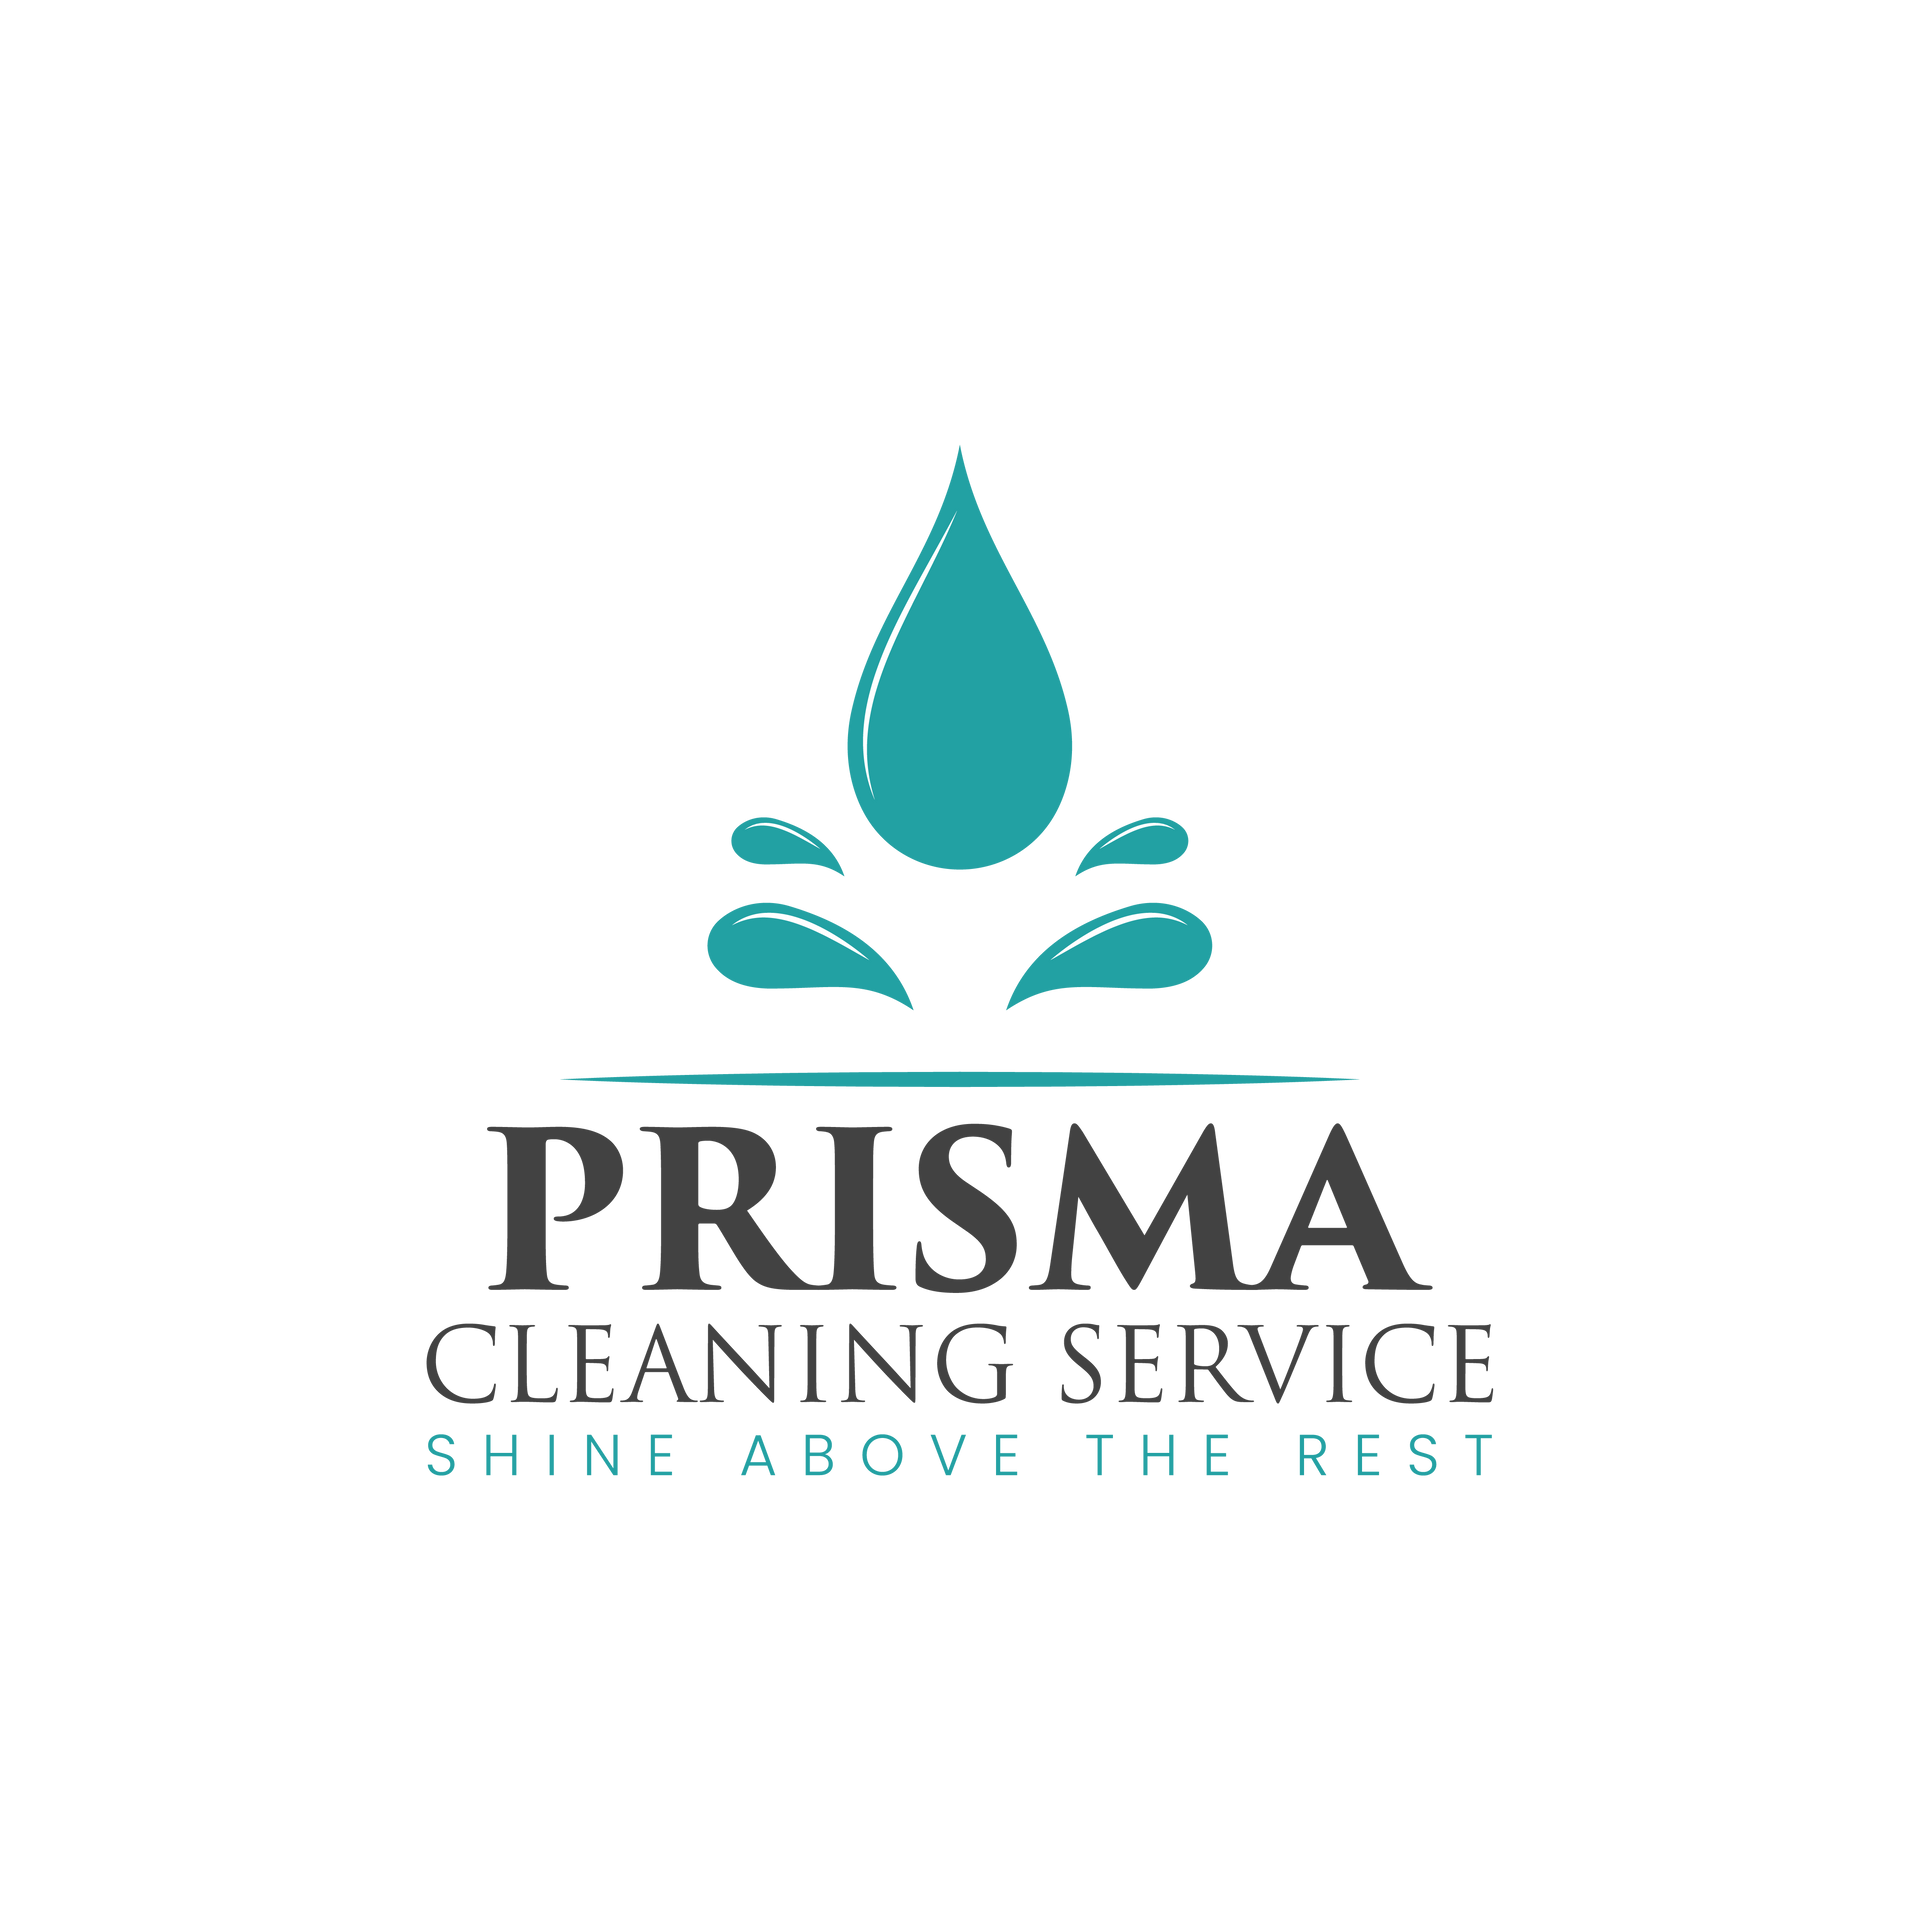 Prisma Cleaning Service logo